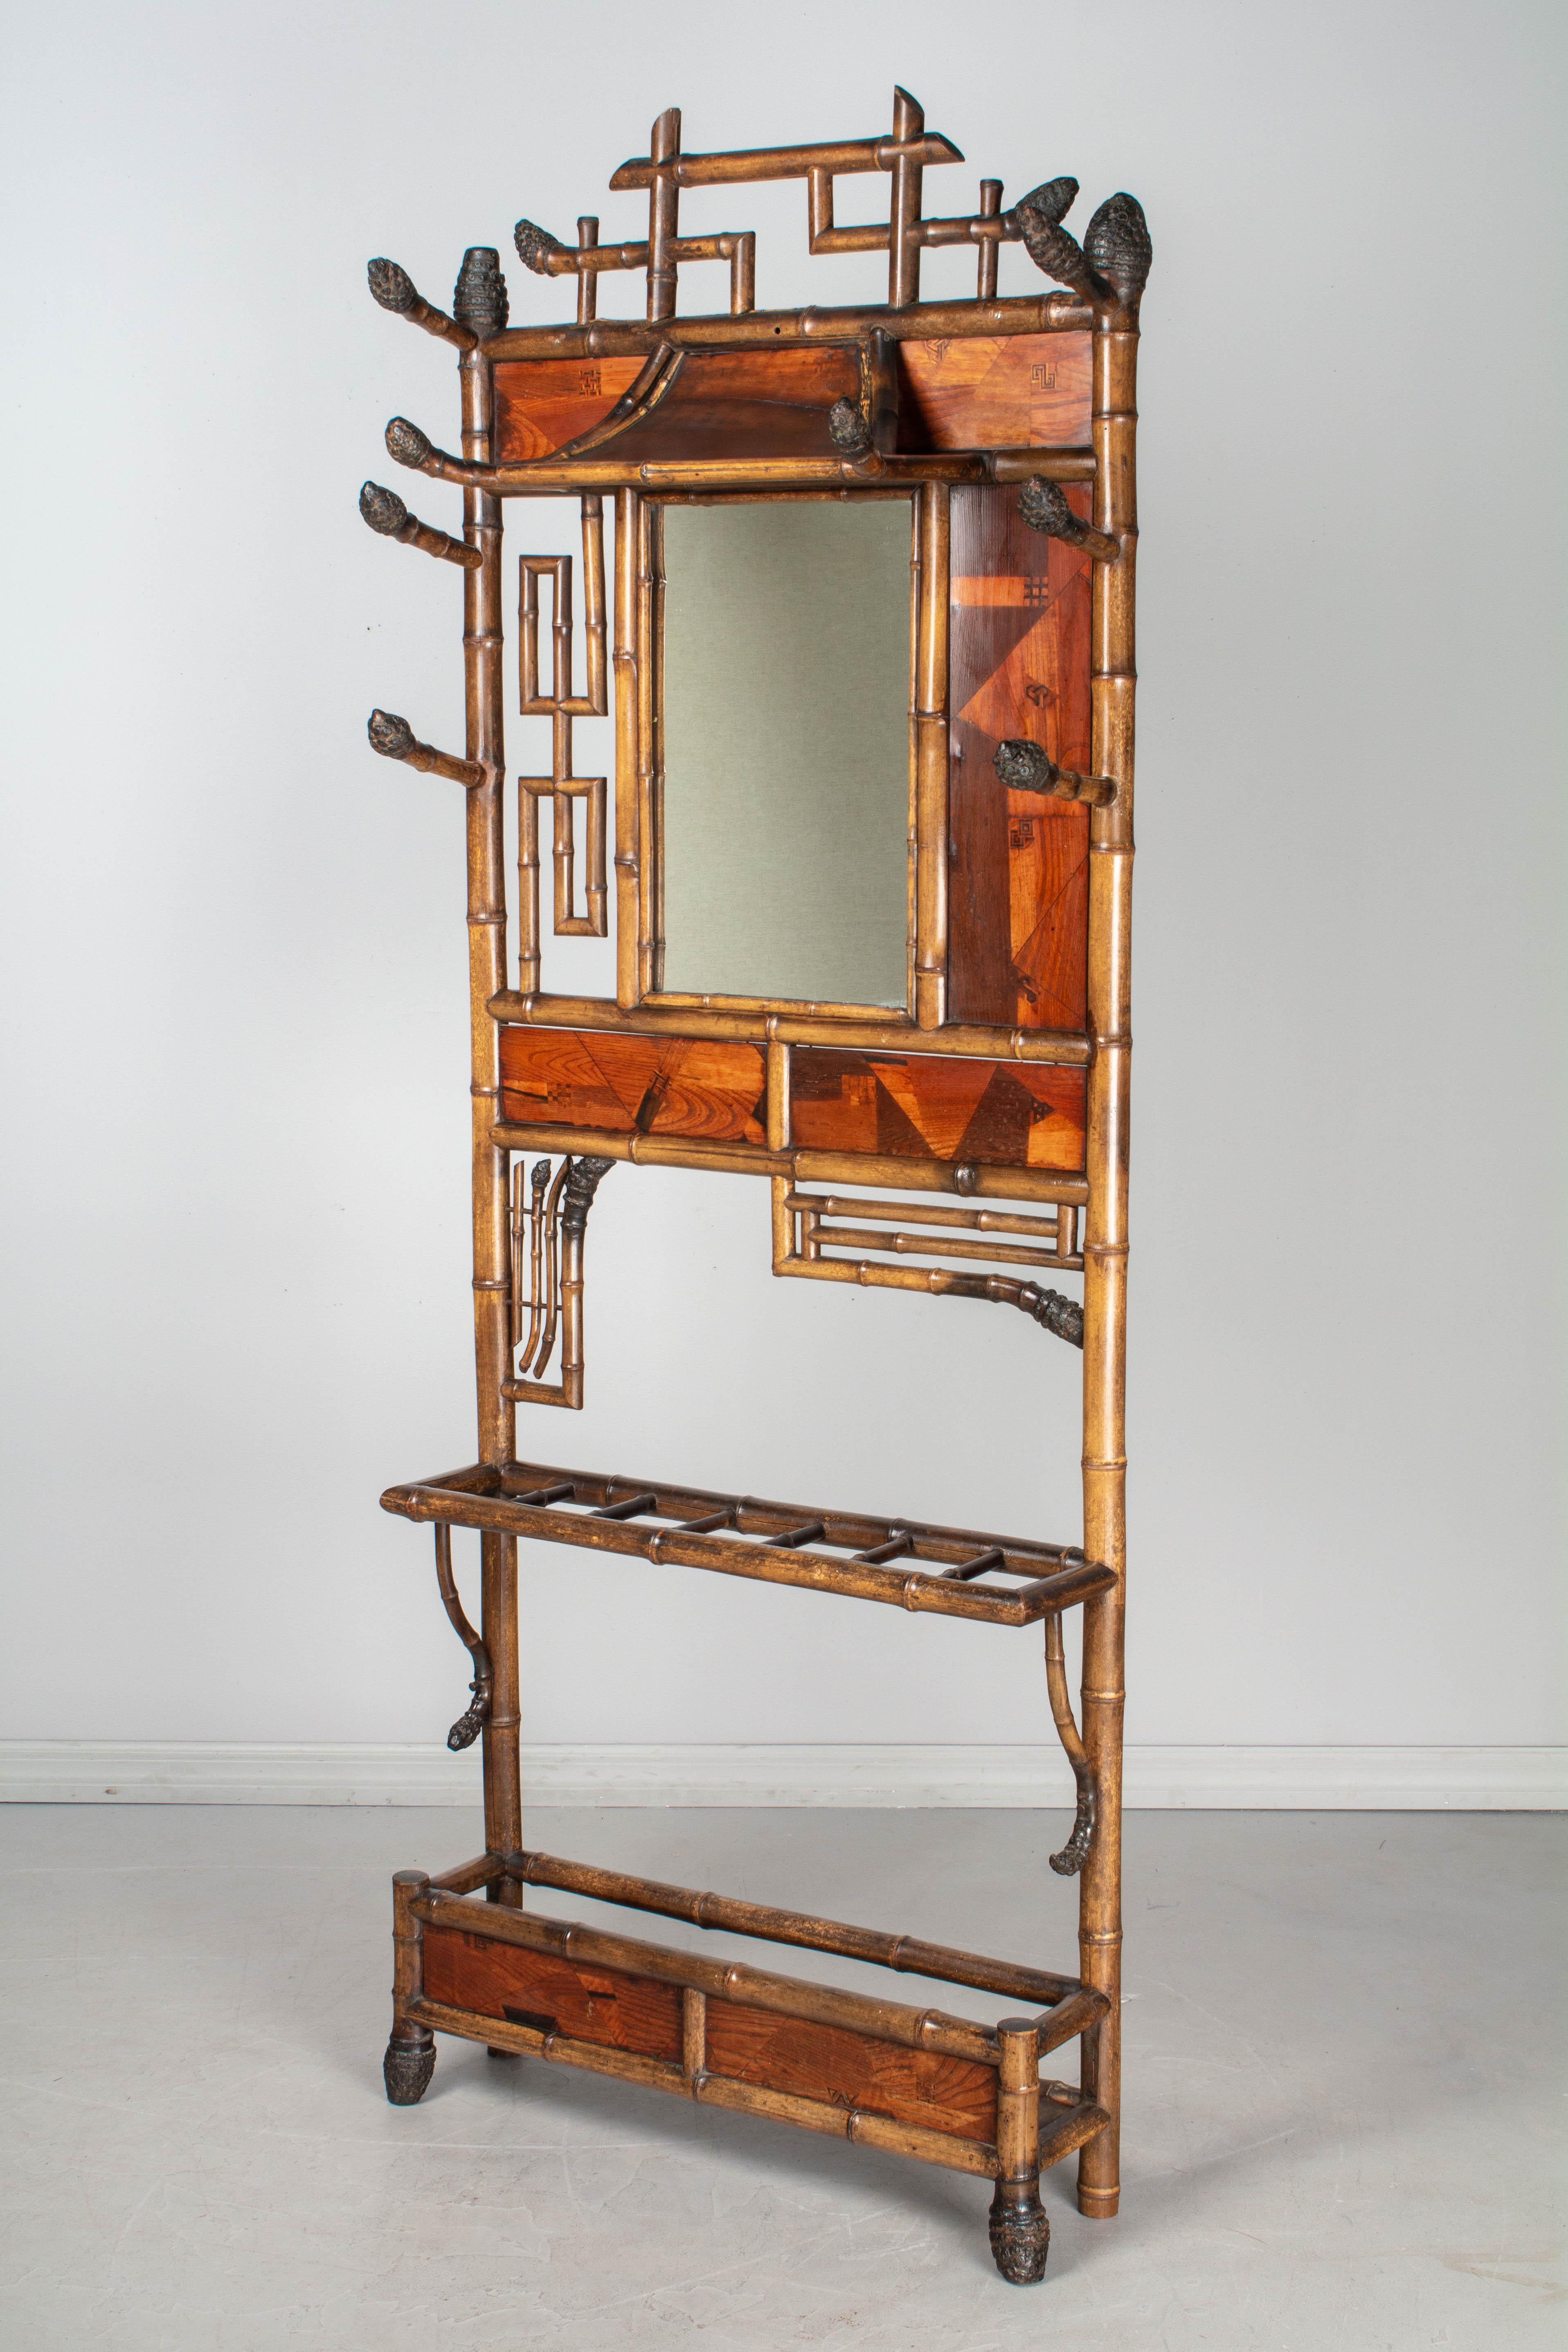 A 19th century French bamboo hall tree, or coat rack, of exceptional design, with asymmetric openwork bamboo sections, marquetry panels and an unusual pagoda style roof above the mirror. Exquisite Japanese marquetry panels with a patchwork of